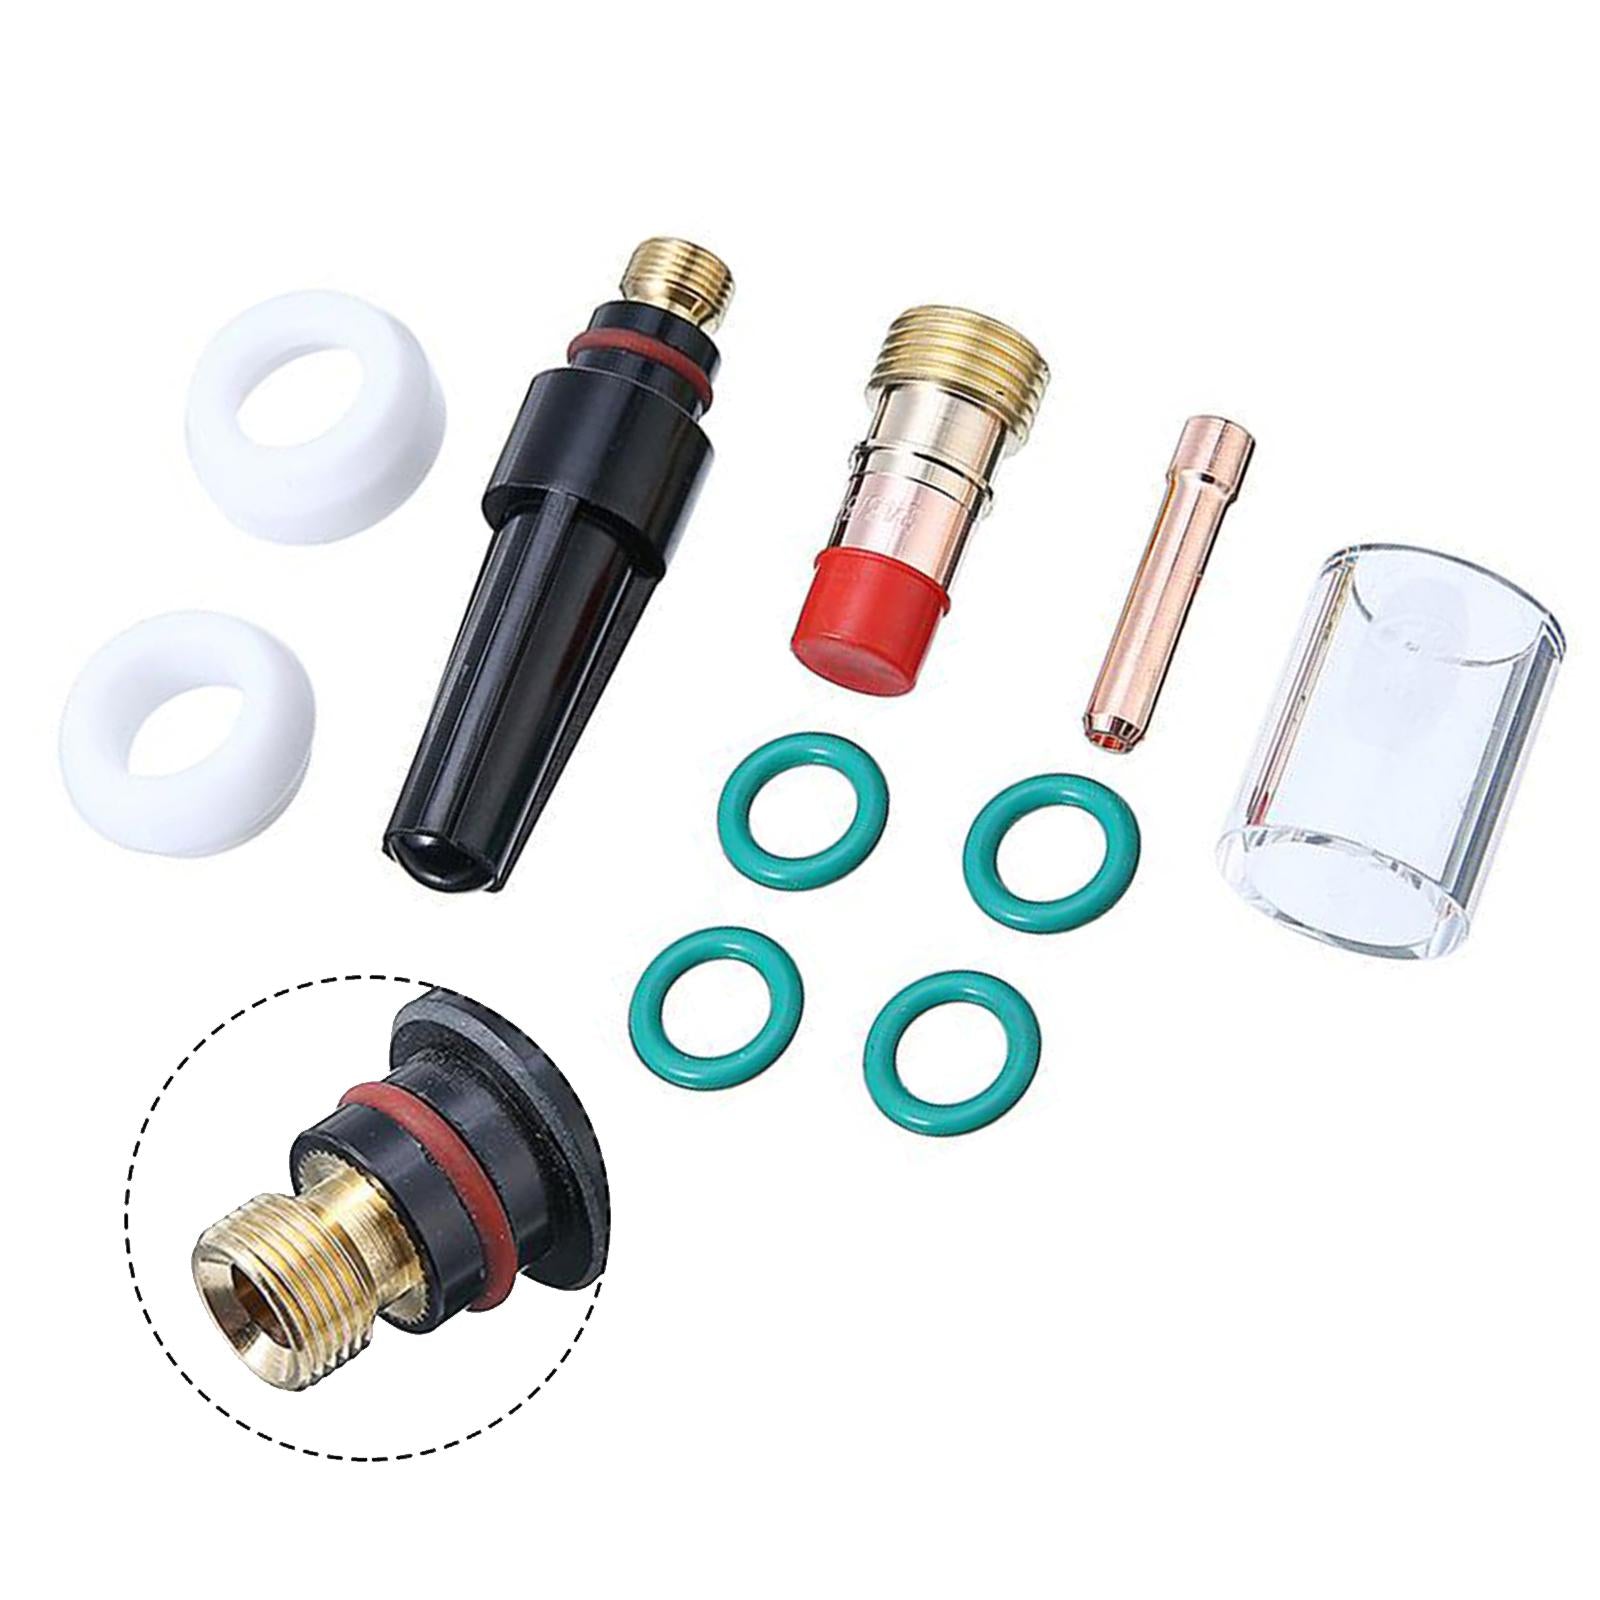 10 Pieces Welding Consumable Kit TIG Welding Torch for WP 17/18/26 Series